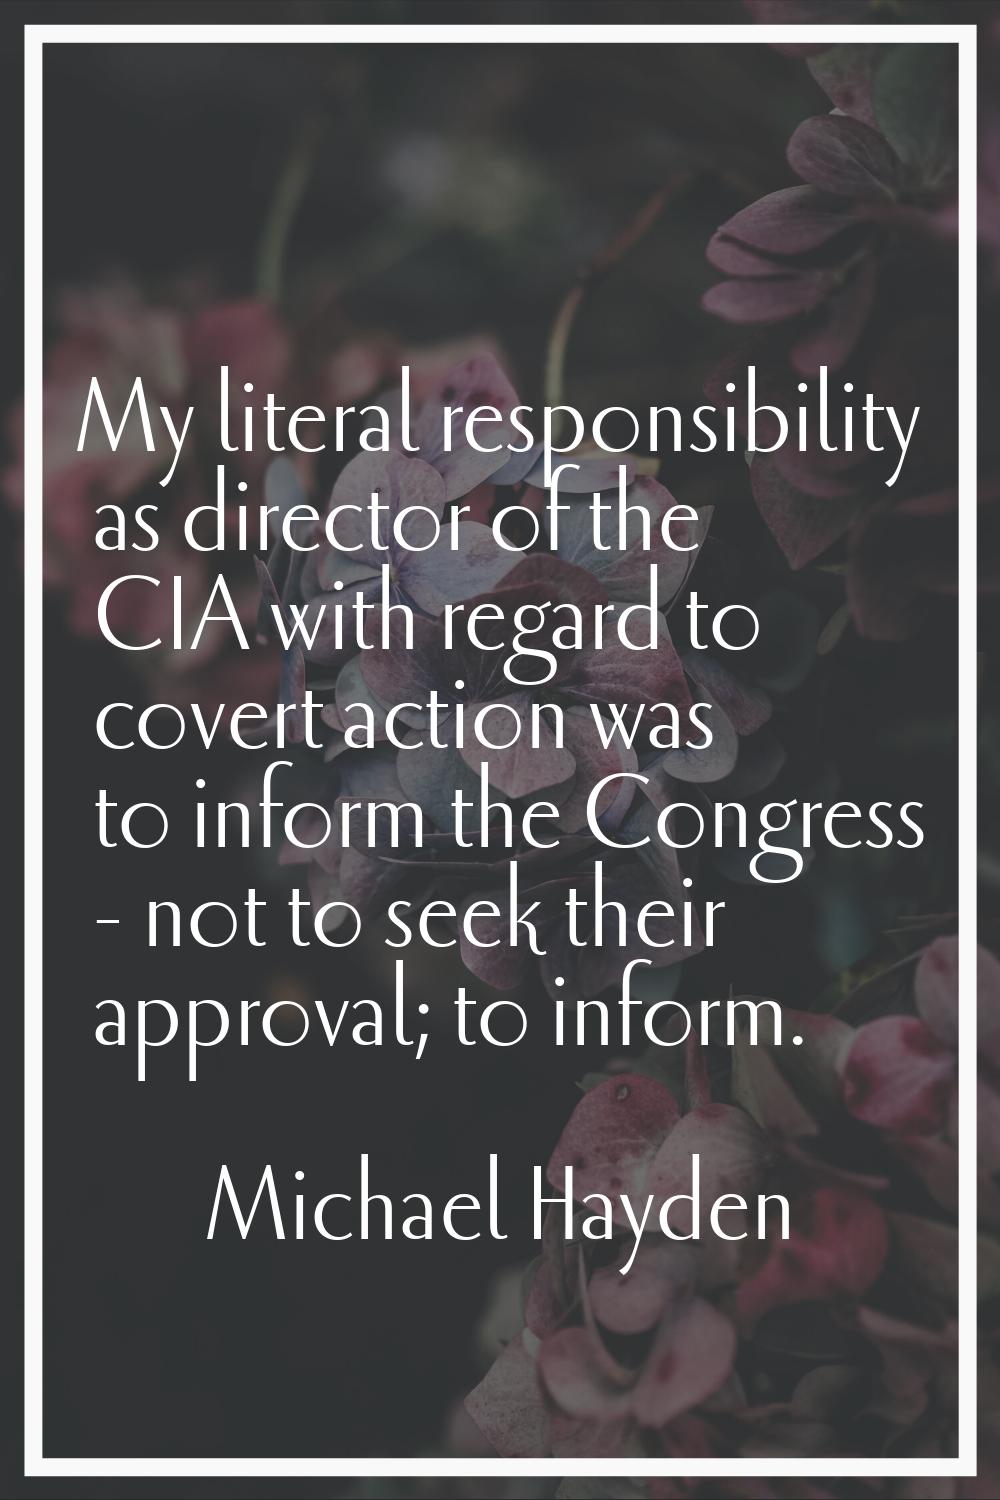 My literal responsibility as director of the CIA with regard to covert action was to inform the Con